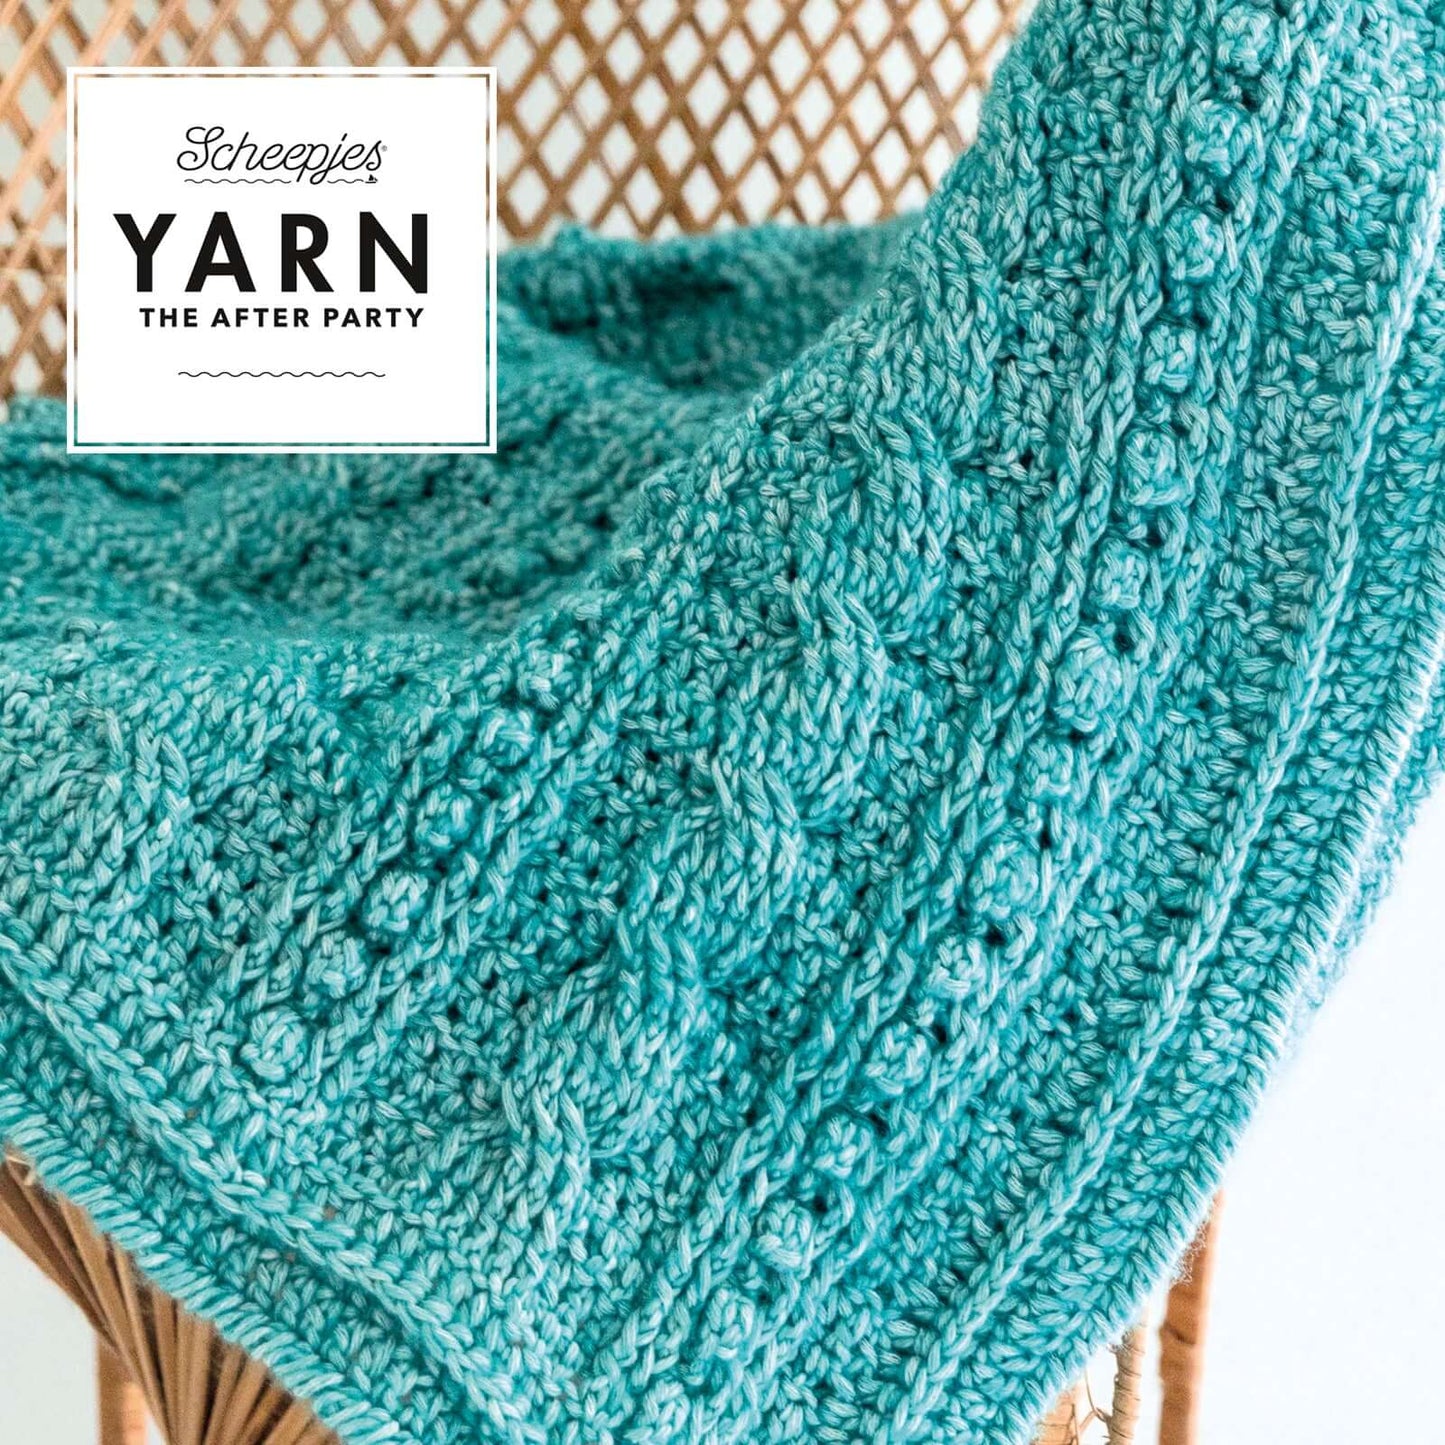 Scheepjes Yarn The After Party no. 24 - Popcorn & Cables Blanket (booklet) - (Crochet)